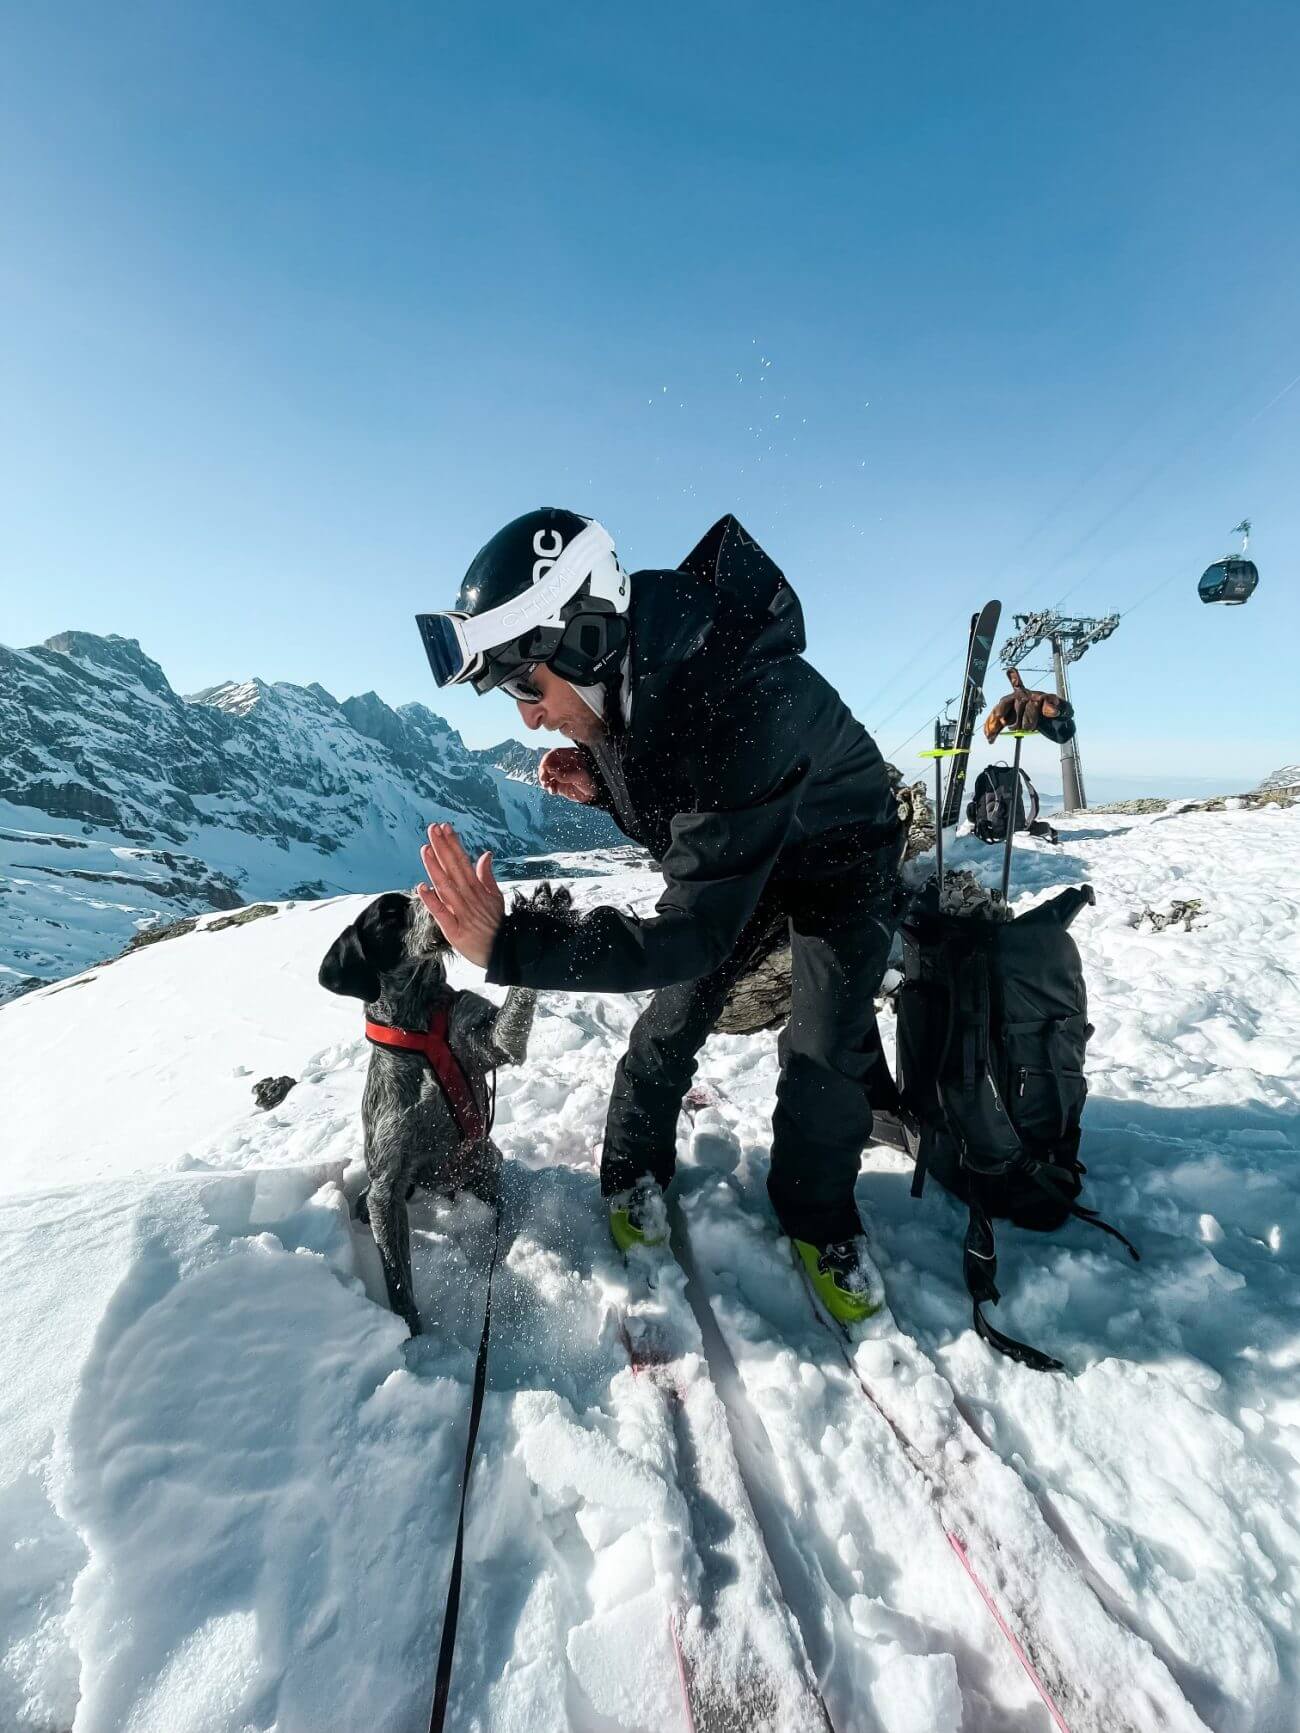 Skier and dog high fiving on the mountain.